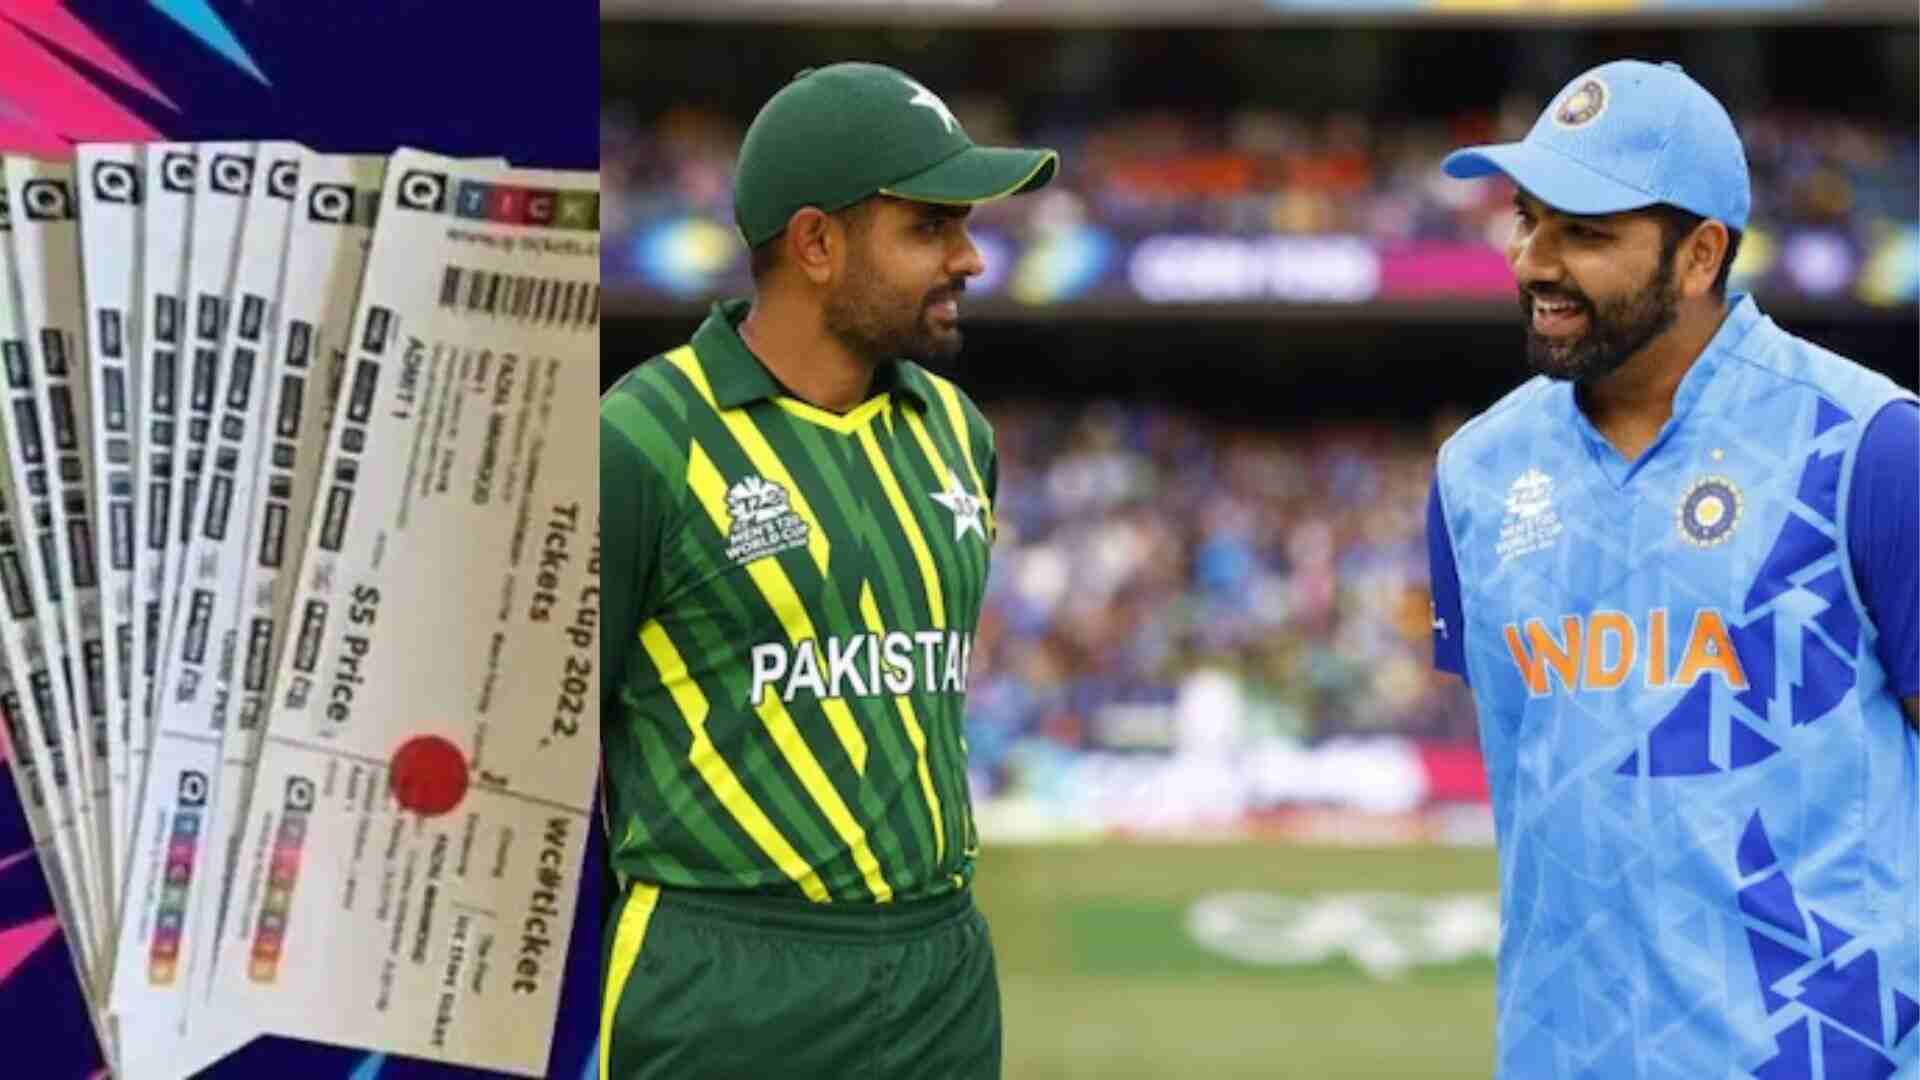 Debate Rages as India-Pakistan T20 WC Ticket Costs Hit Record Rs 16.5 Lakh